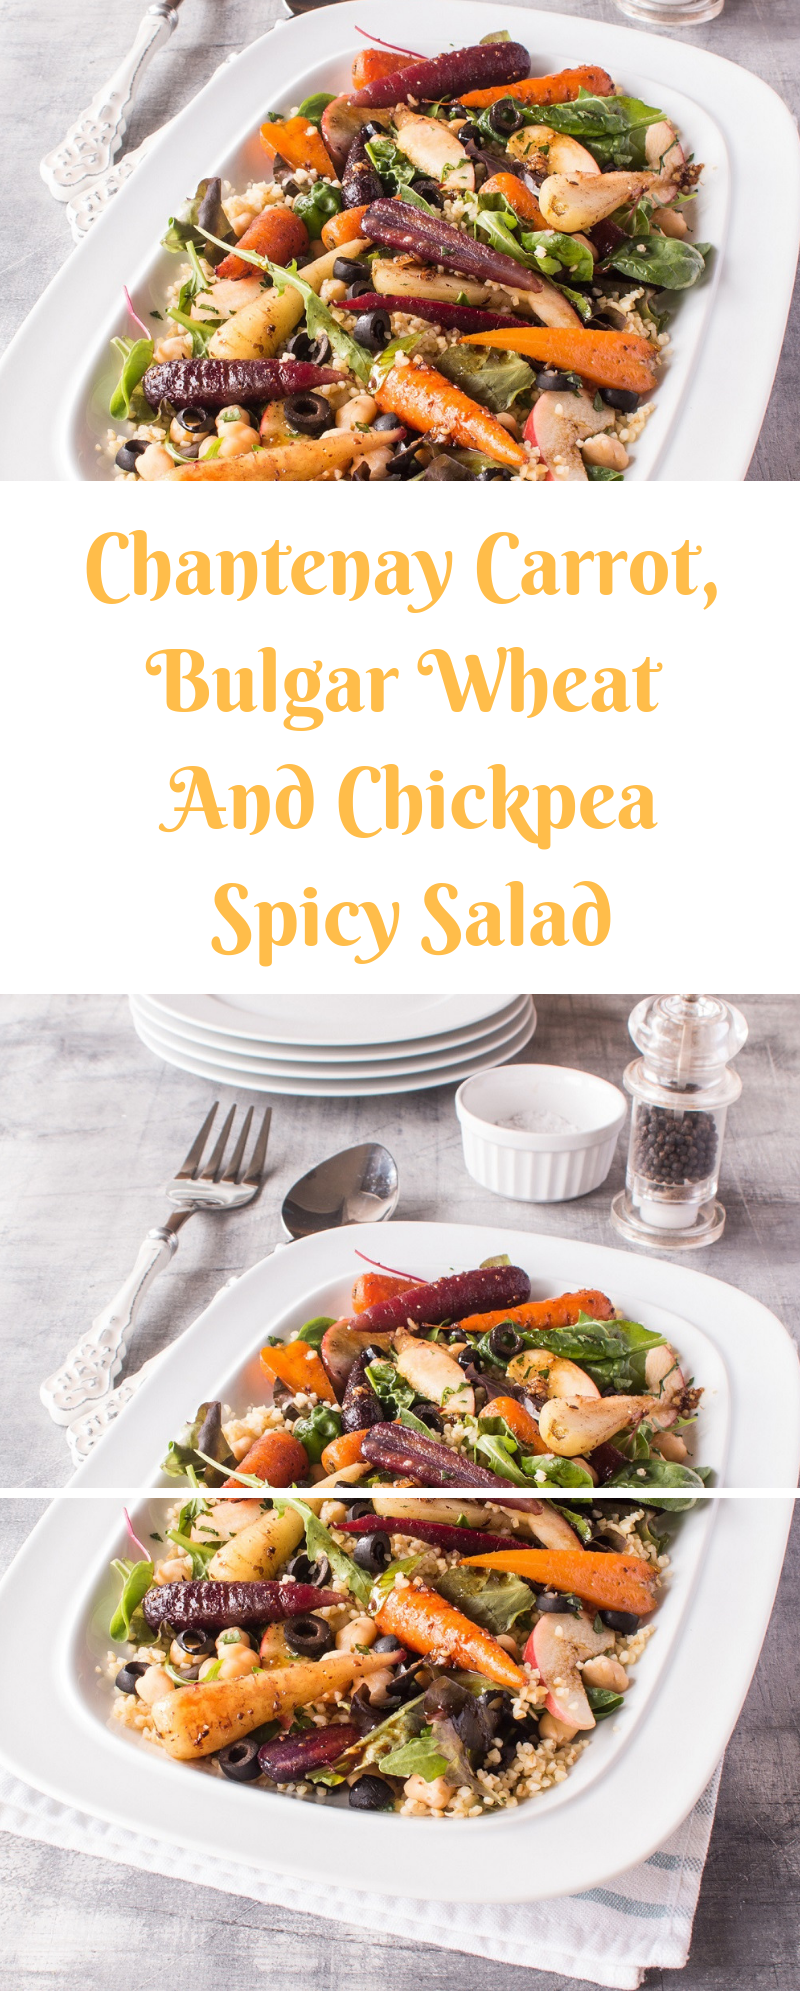 Chantenay Carrot, Bulgar Wheat And Chickpea Spicy Salad